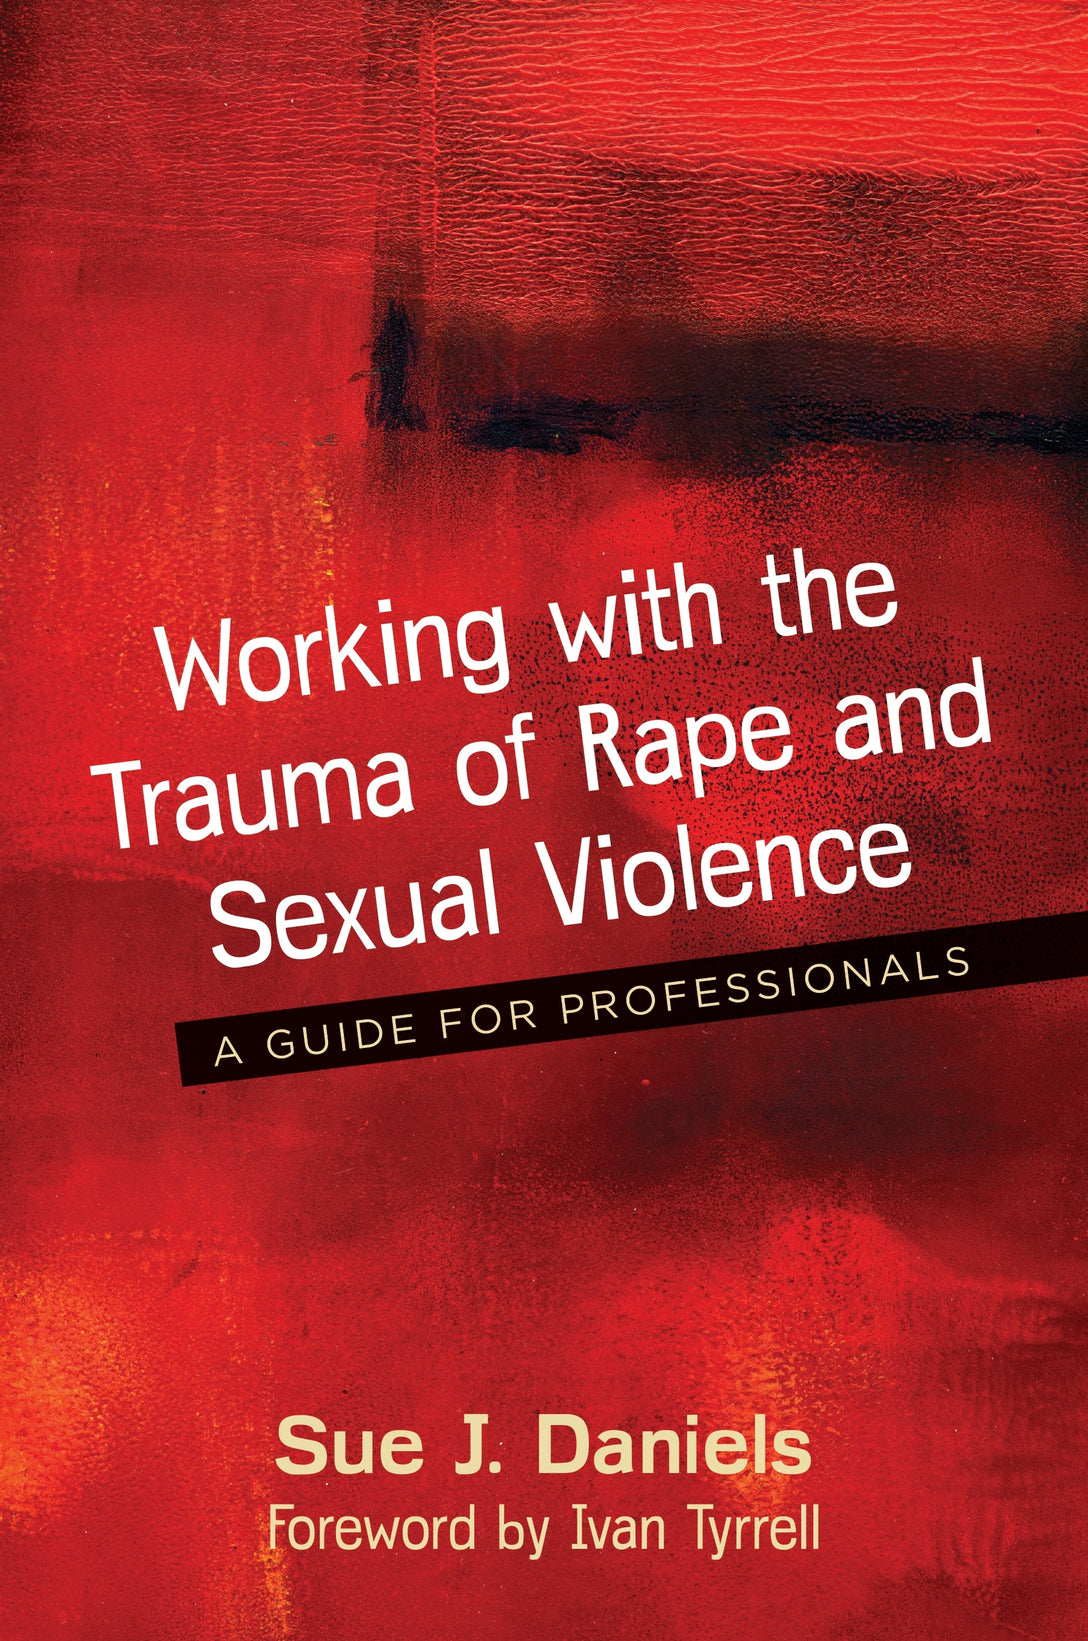 Working with the Trauma of Rape and Sexual Violence by Ivan Tyrrell, Sue J. Daniels